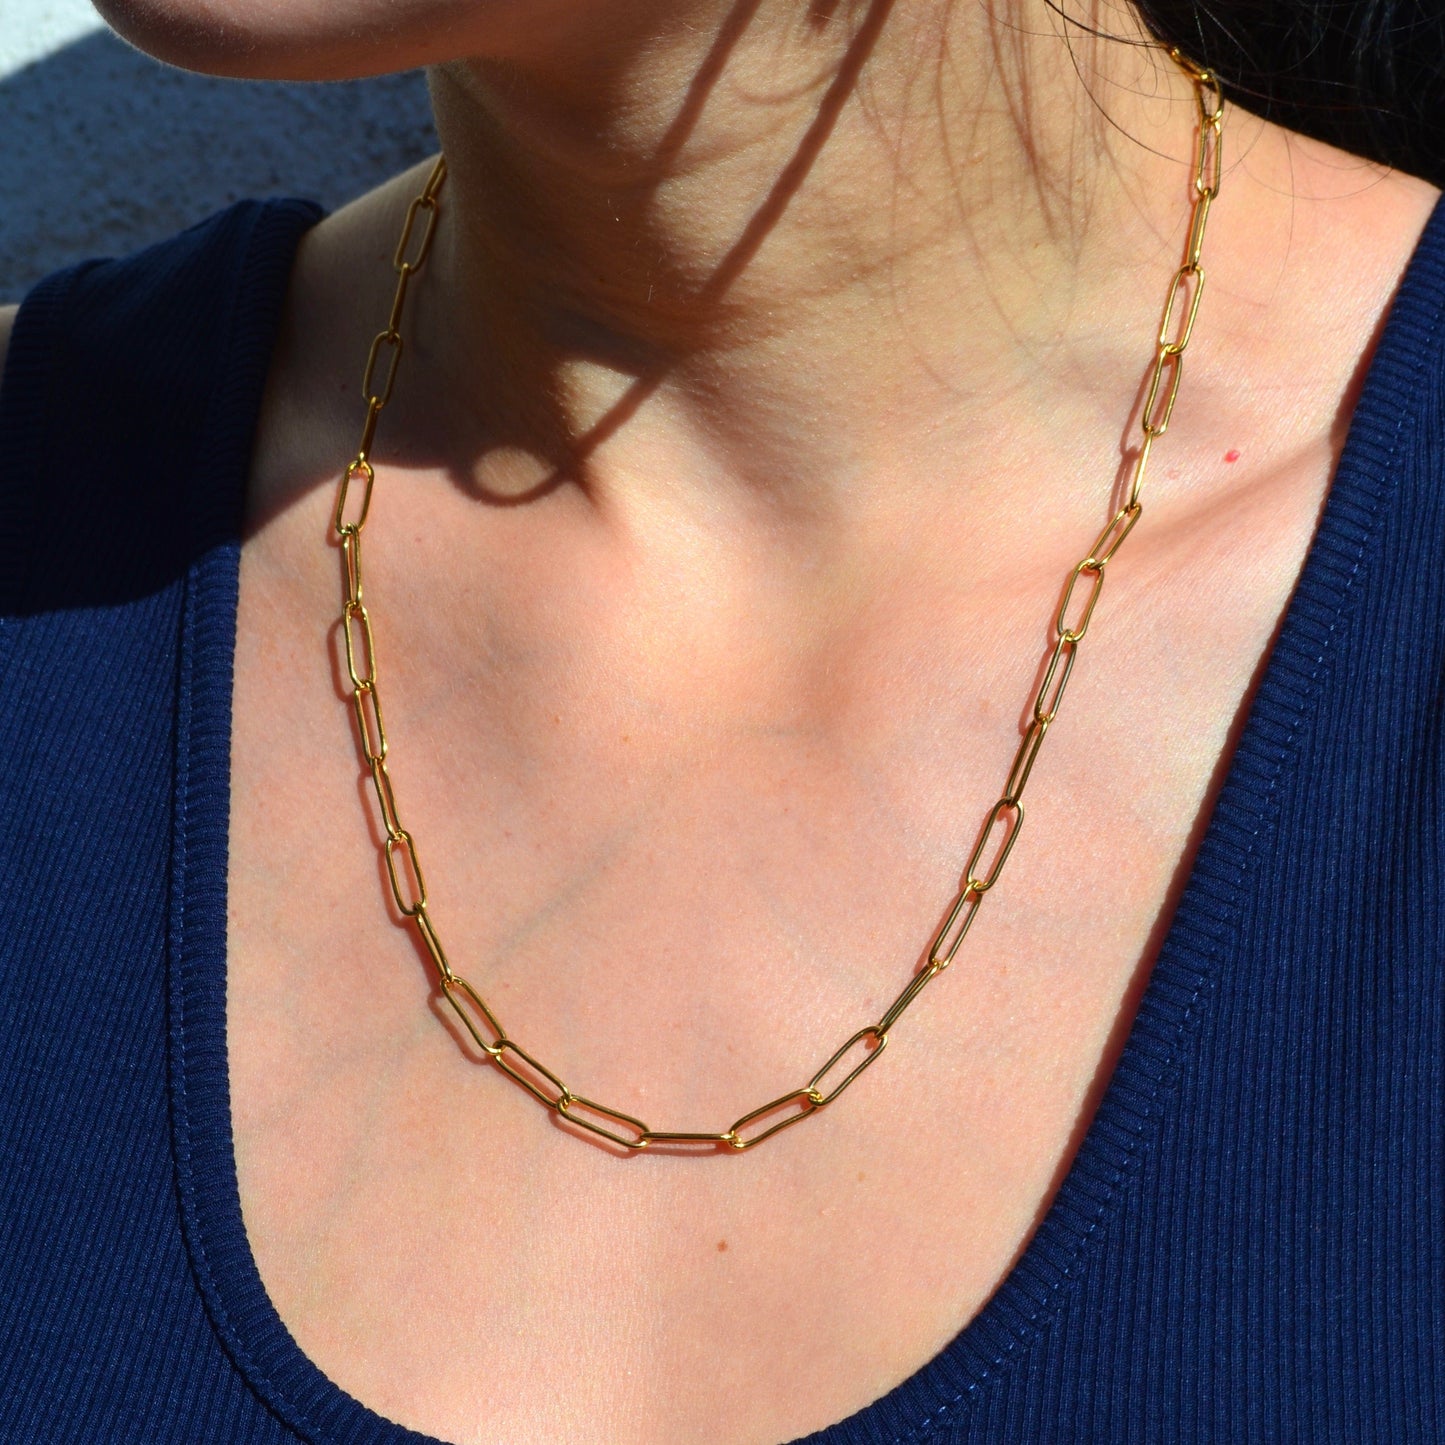 Opes Robur GOLD PETITE LONG LINK CHAIN